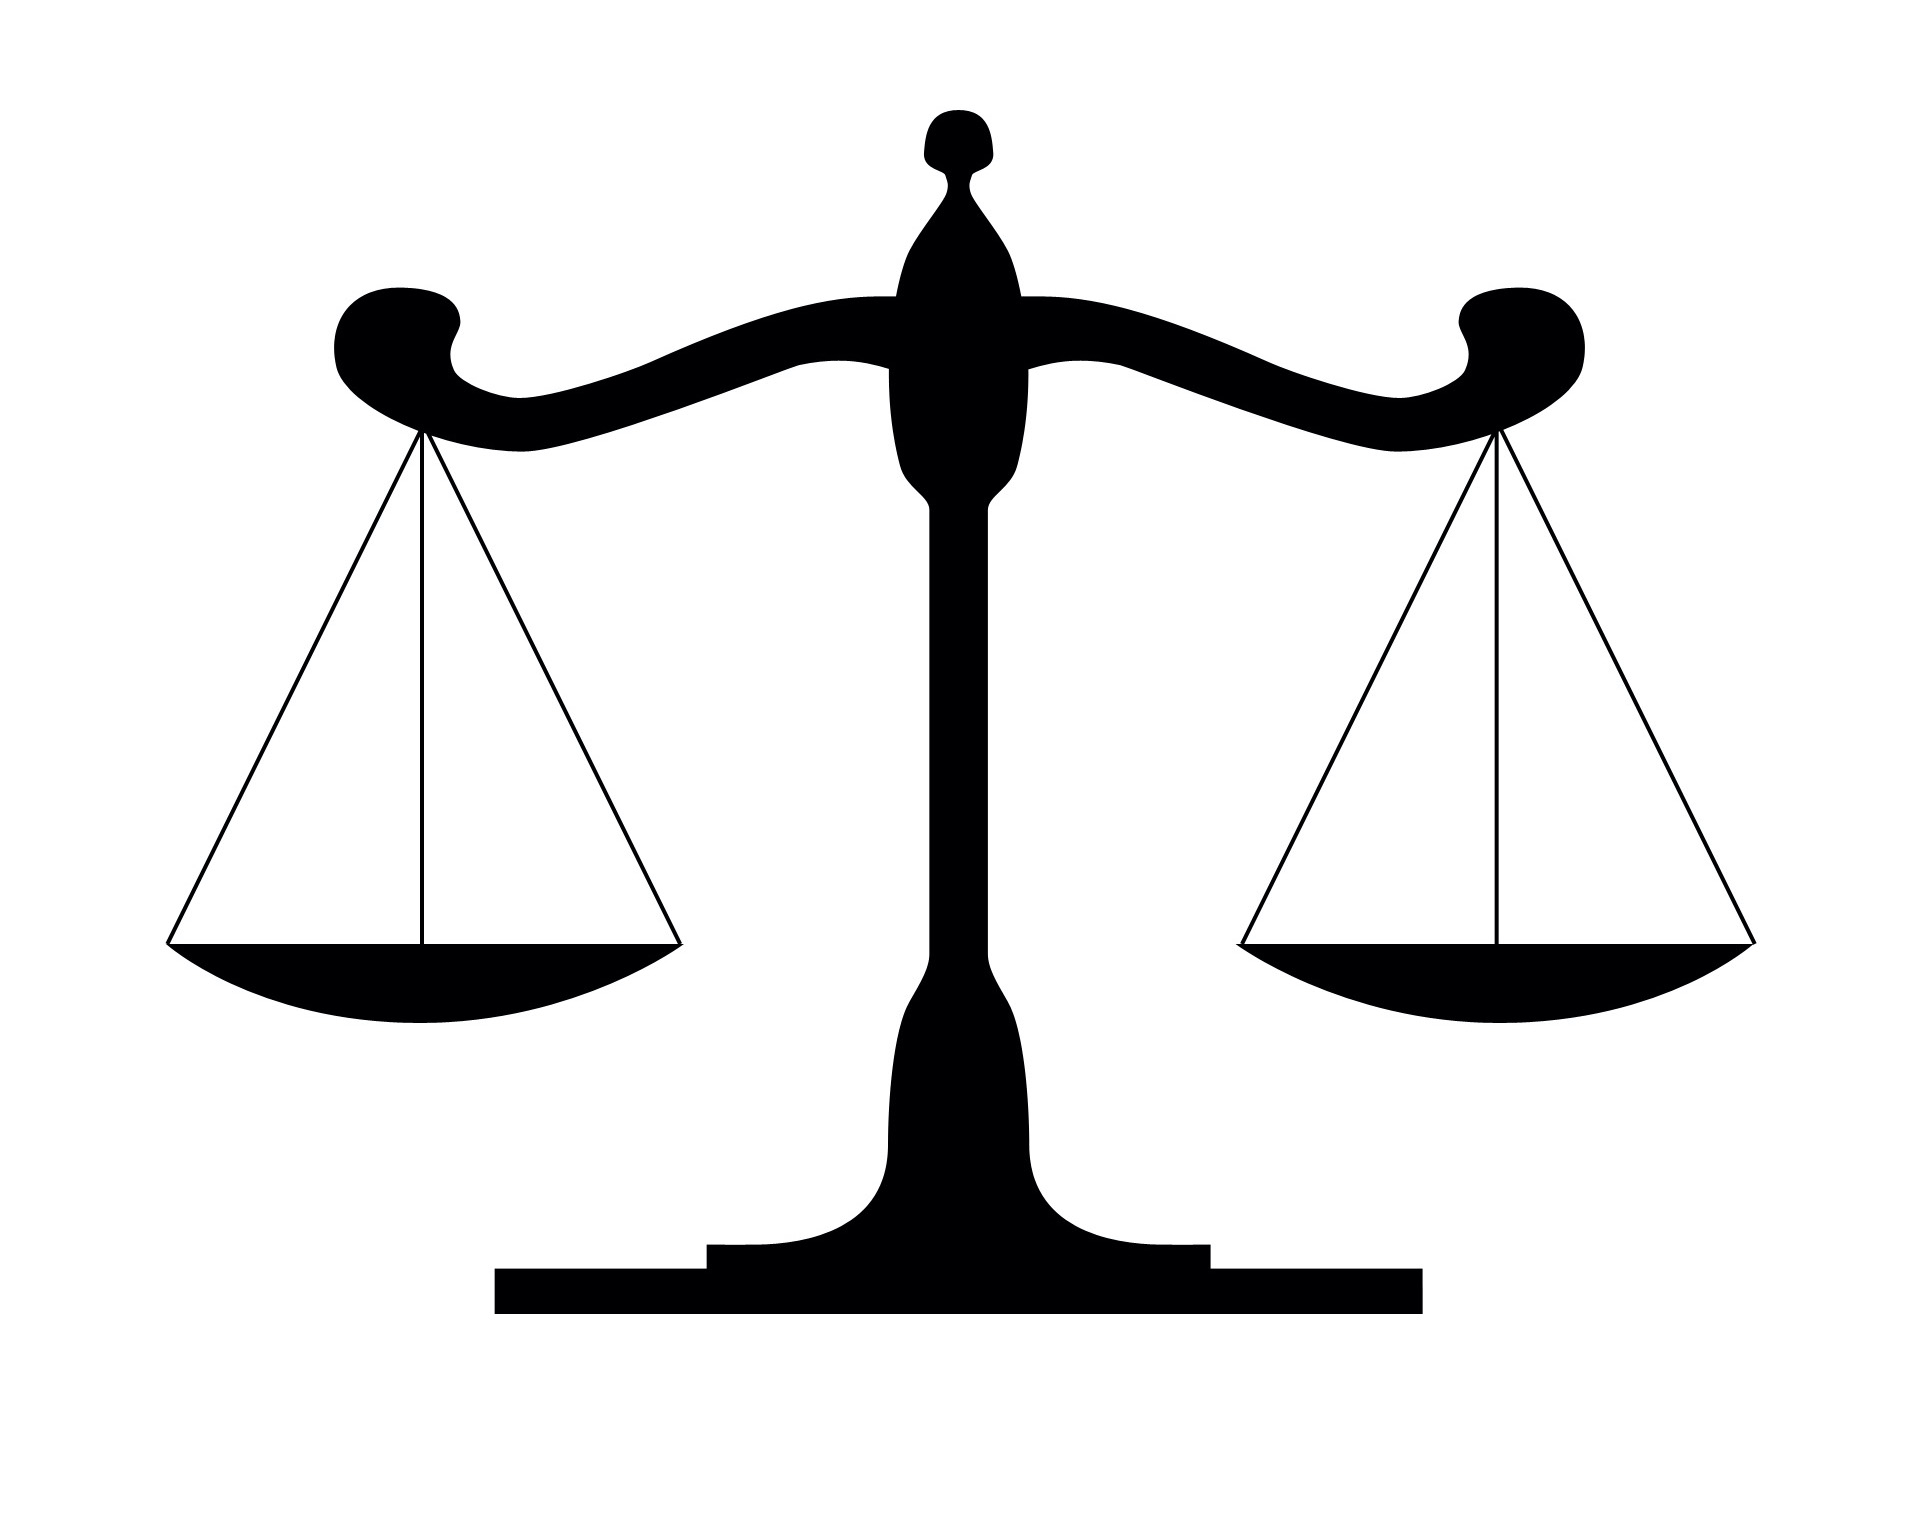 An icon of black balancing scales